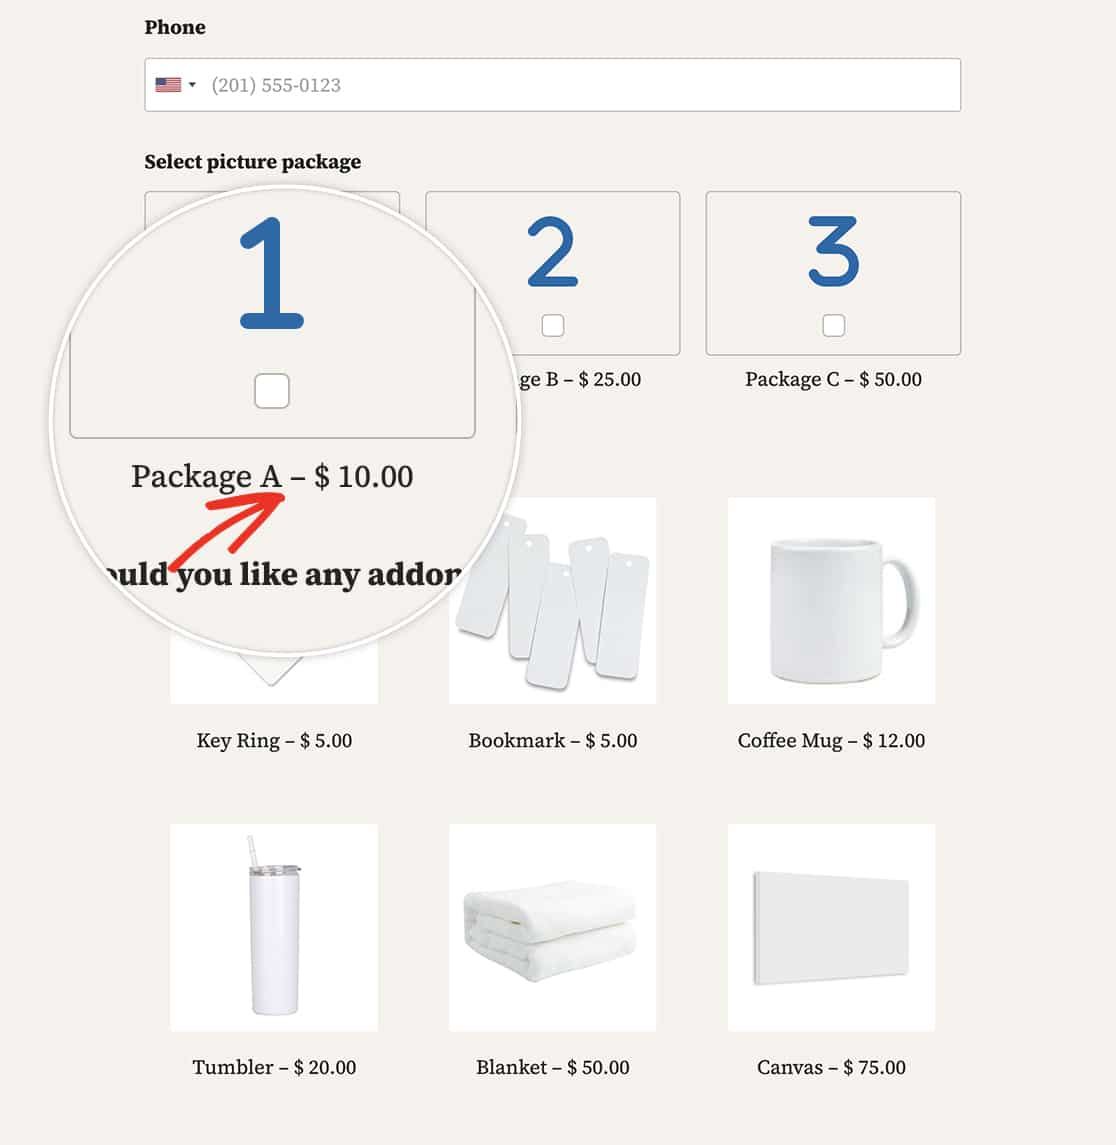 by default, when you enable to display prices after the label, the hyphen will separate the label and the price